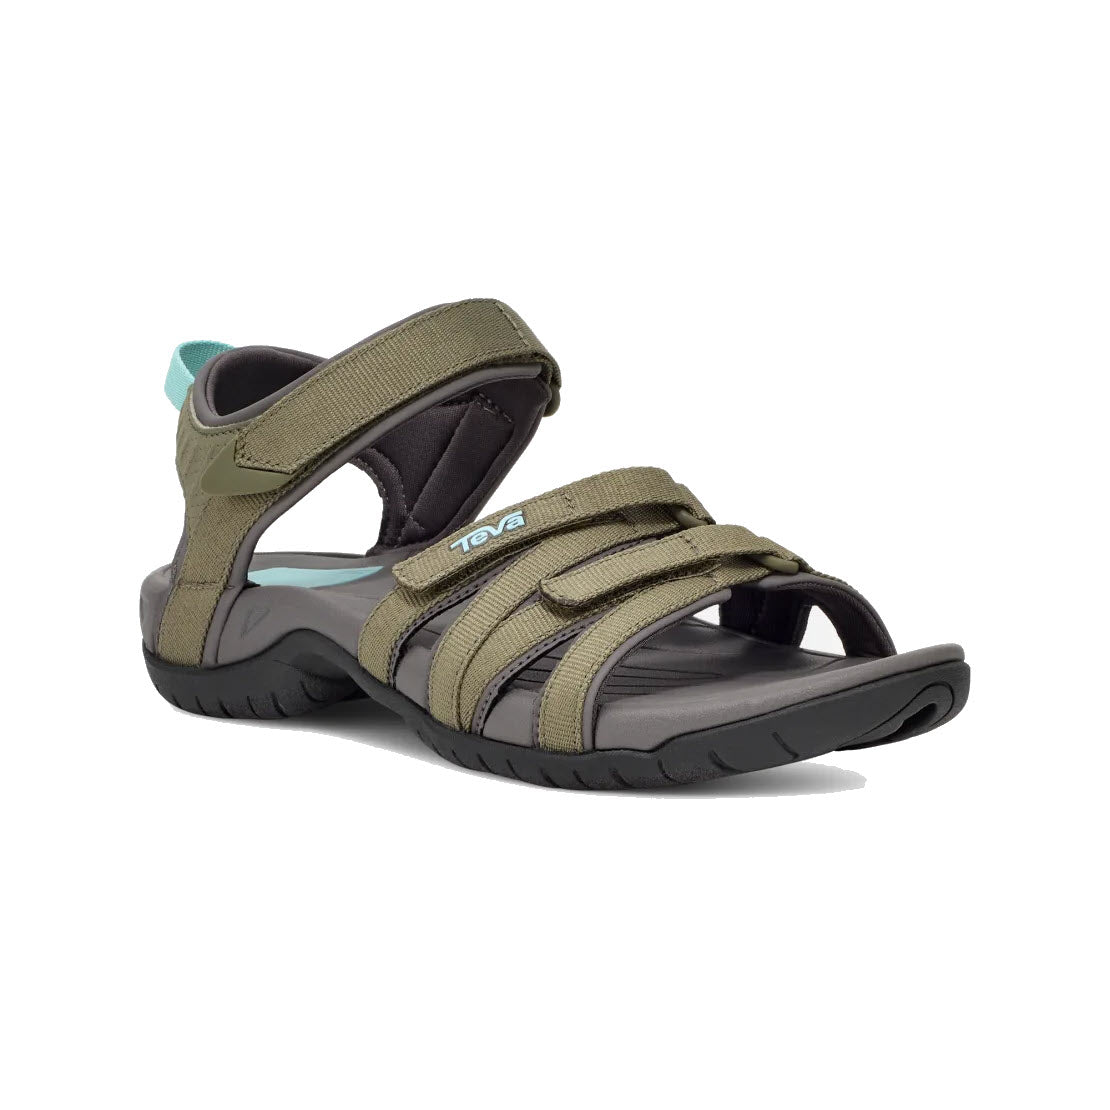 A pair of olive green women&#39;s Teva Tirra sandals with multiple adjustable straps and a black and teal sole, displayed on a white background.